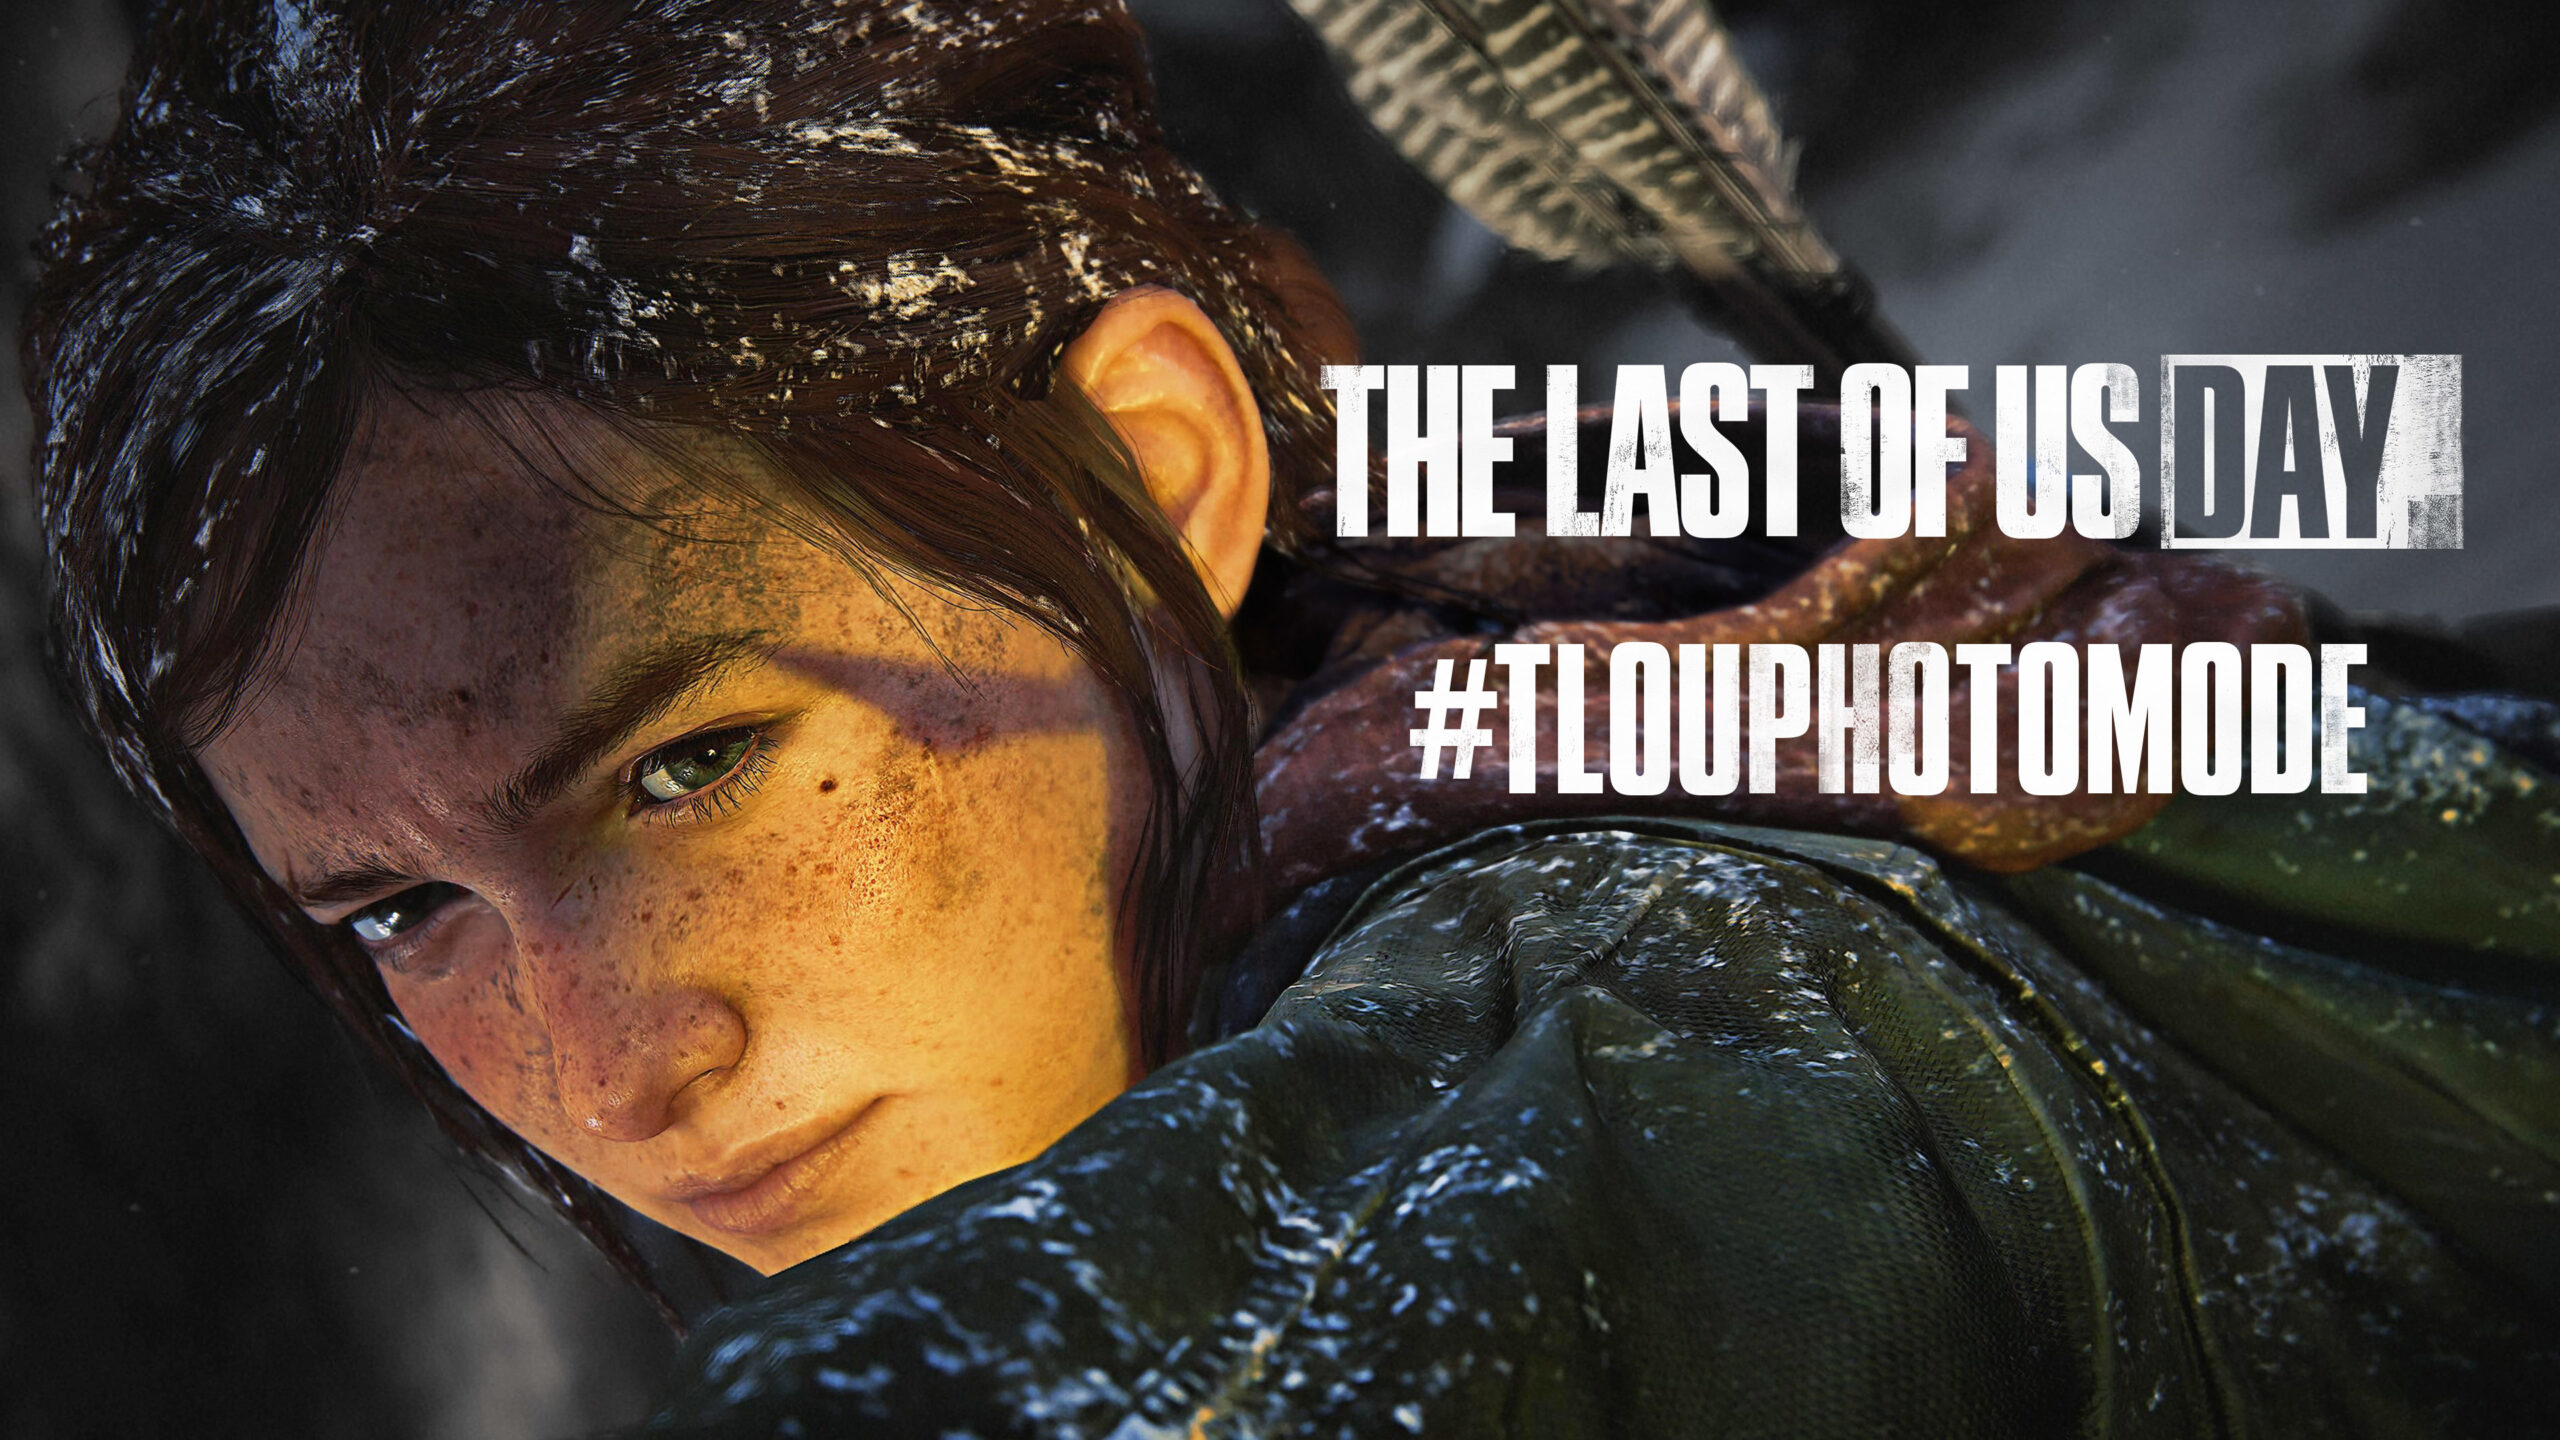 Experience The Last of Us in Our Top Picks Available Now